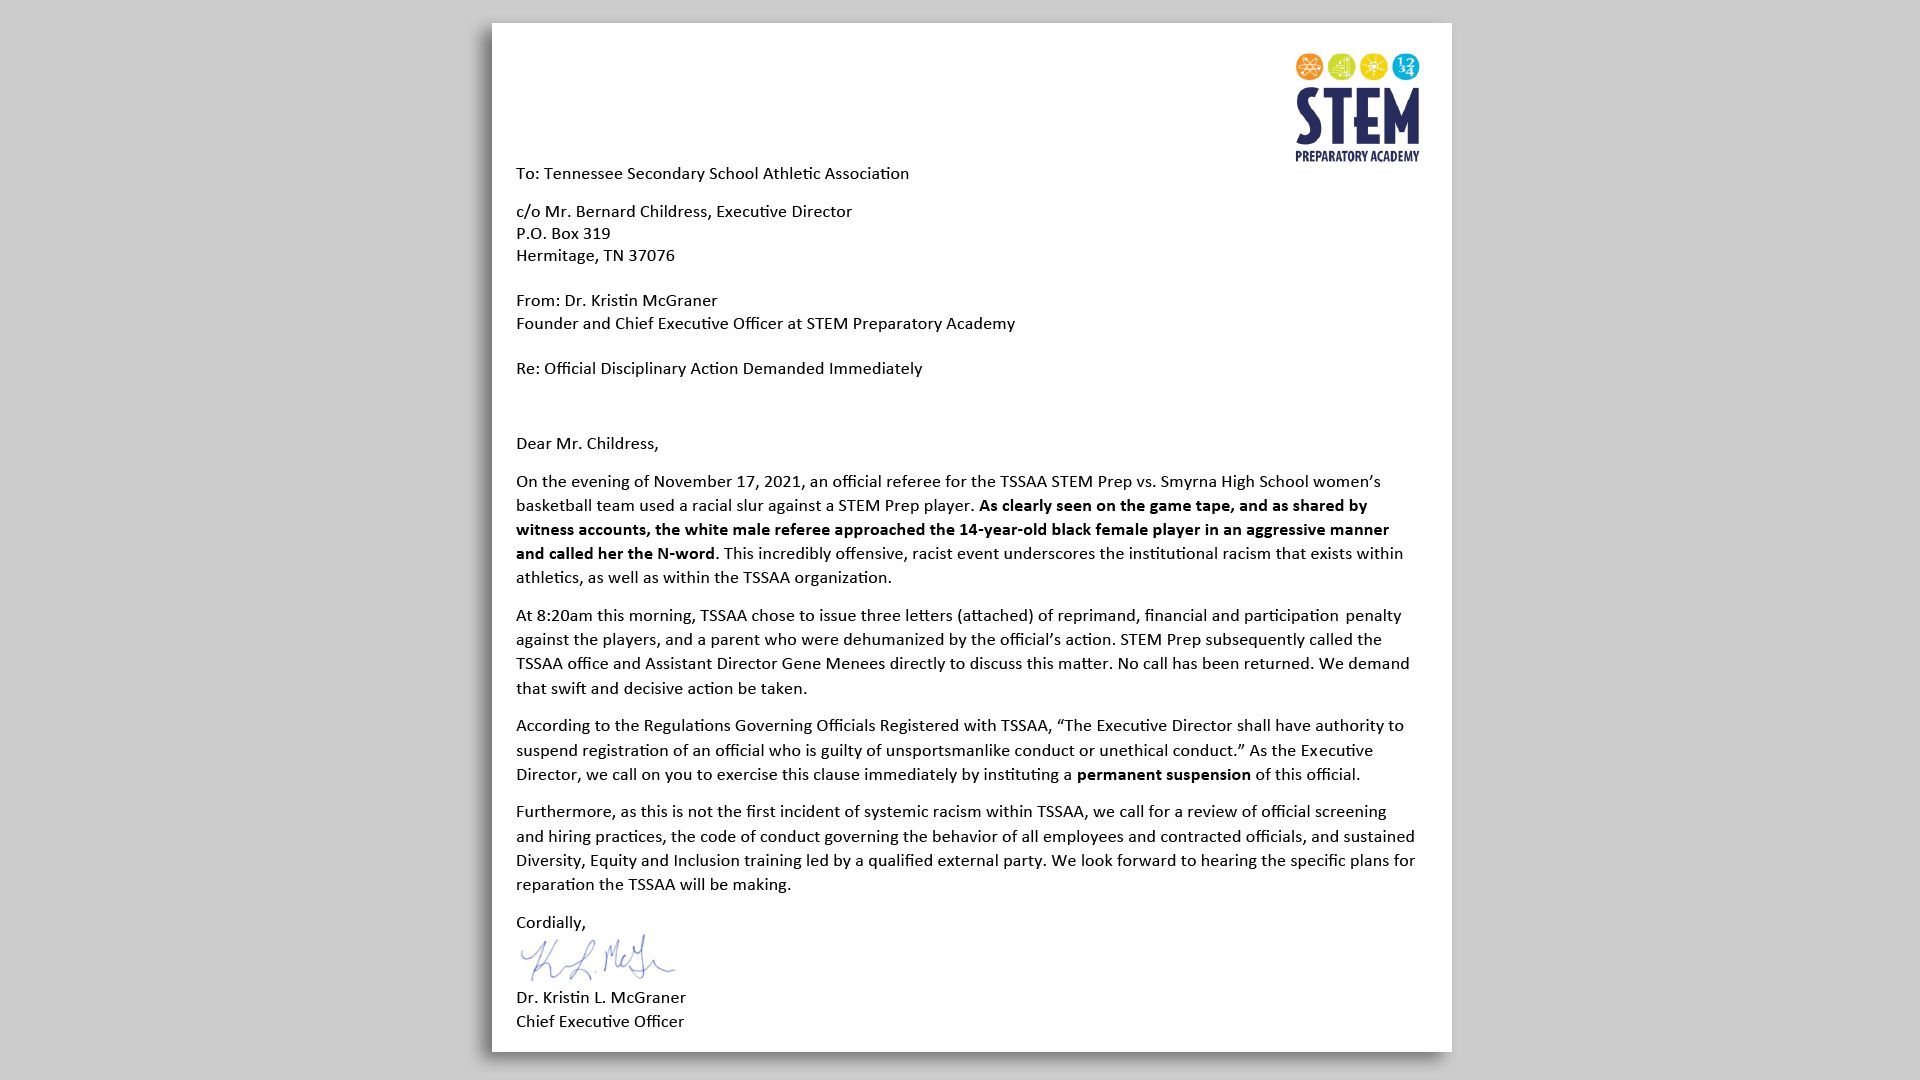 The leader of Nashville charter school STEM Preparatory Academy sent a letter saying the incident was a vivid illustration of "institutional racism" embedded in athletics and the TSSAA itself.